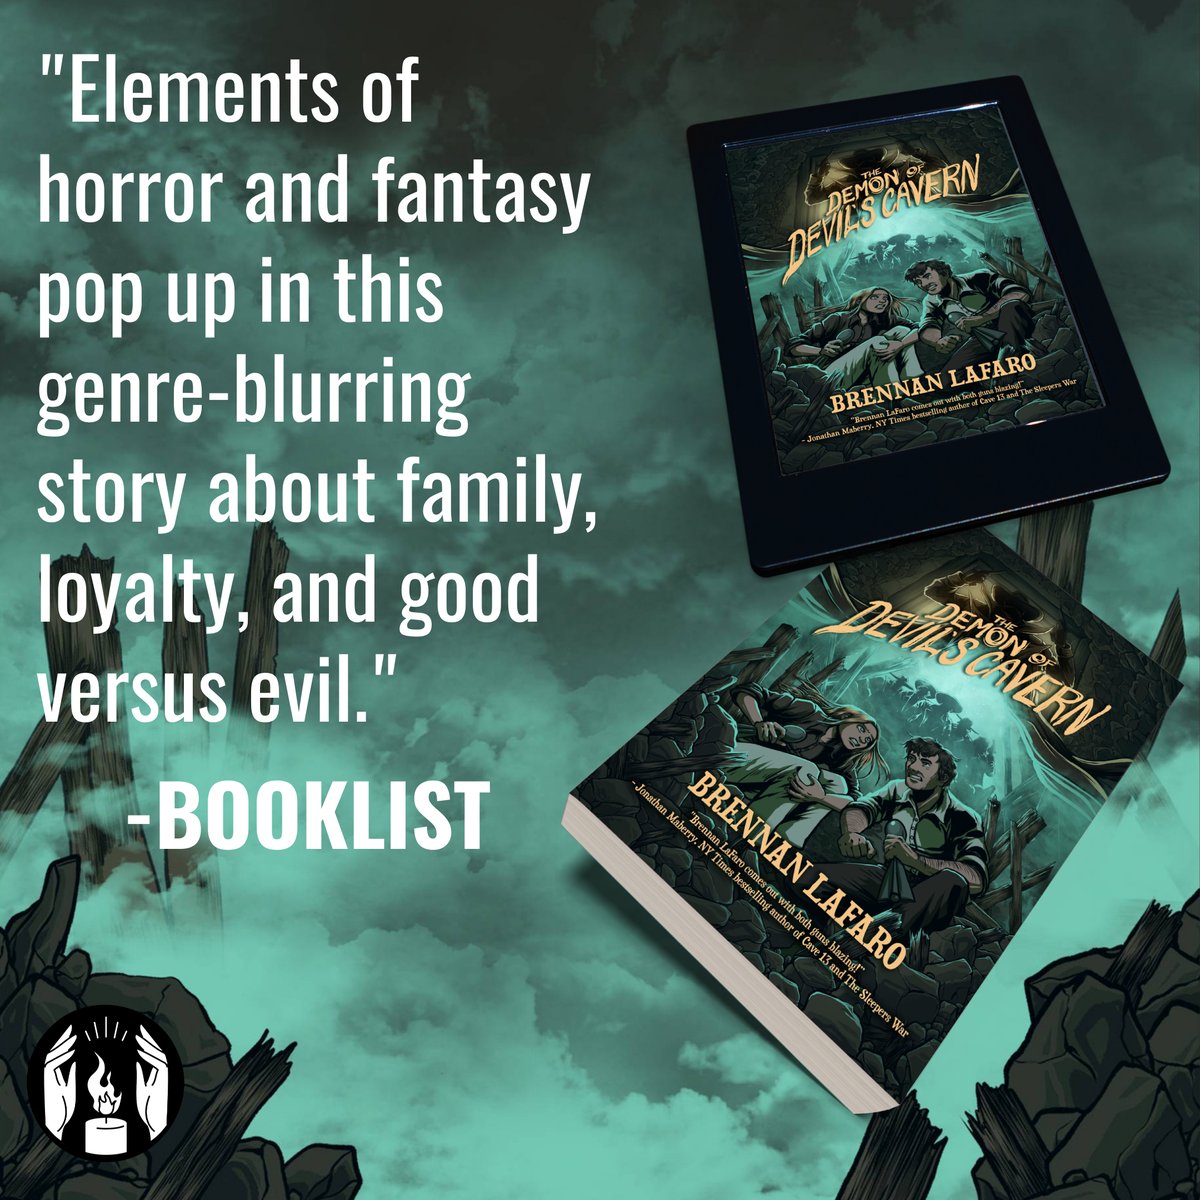 💀 Get ready to face a nightmarish landscape where gunpowder and the macabre collide in a haunting dance of terror. 💰 BUY THE BOOK! rfr.bz/tle344q,